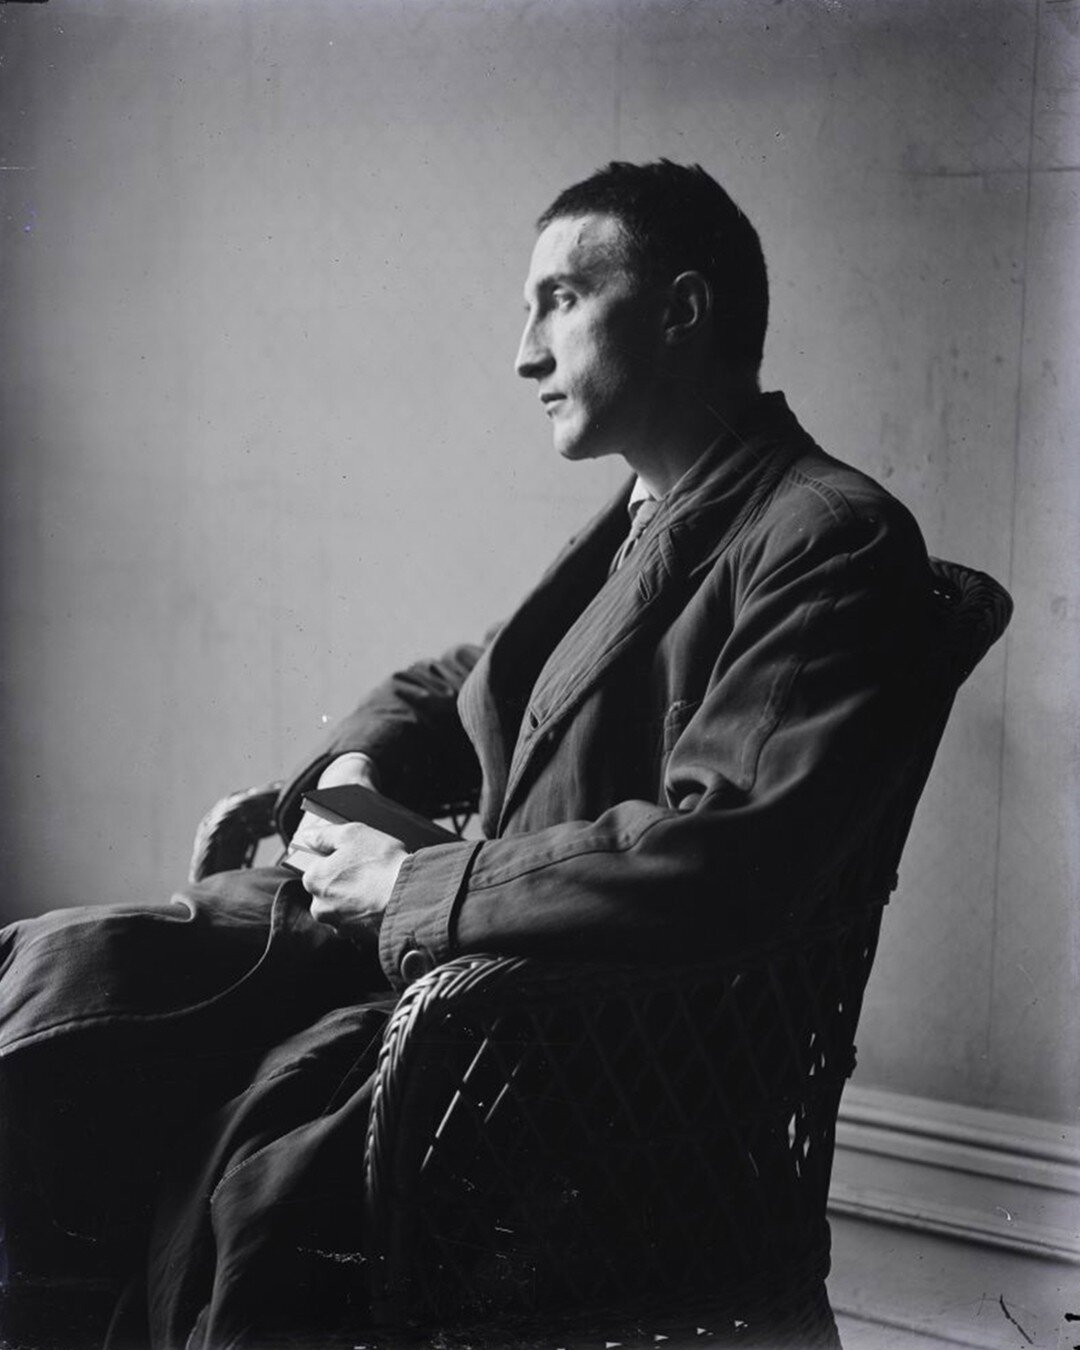 &ldquo;What I have in mind is that art may be bad, good or indifferent, but, whatever adjective is used, we must call it art, and bad art is still art in the same way that a bad emotion is still an emotion.&rdquo;
― Marcel Duchamp

Happy Birthday to 